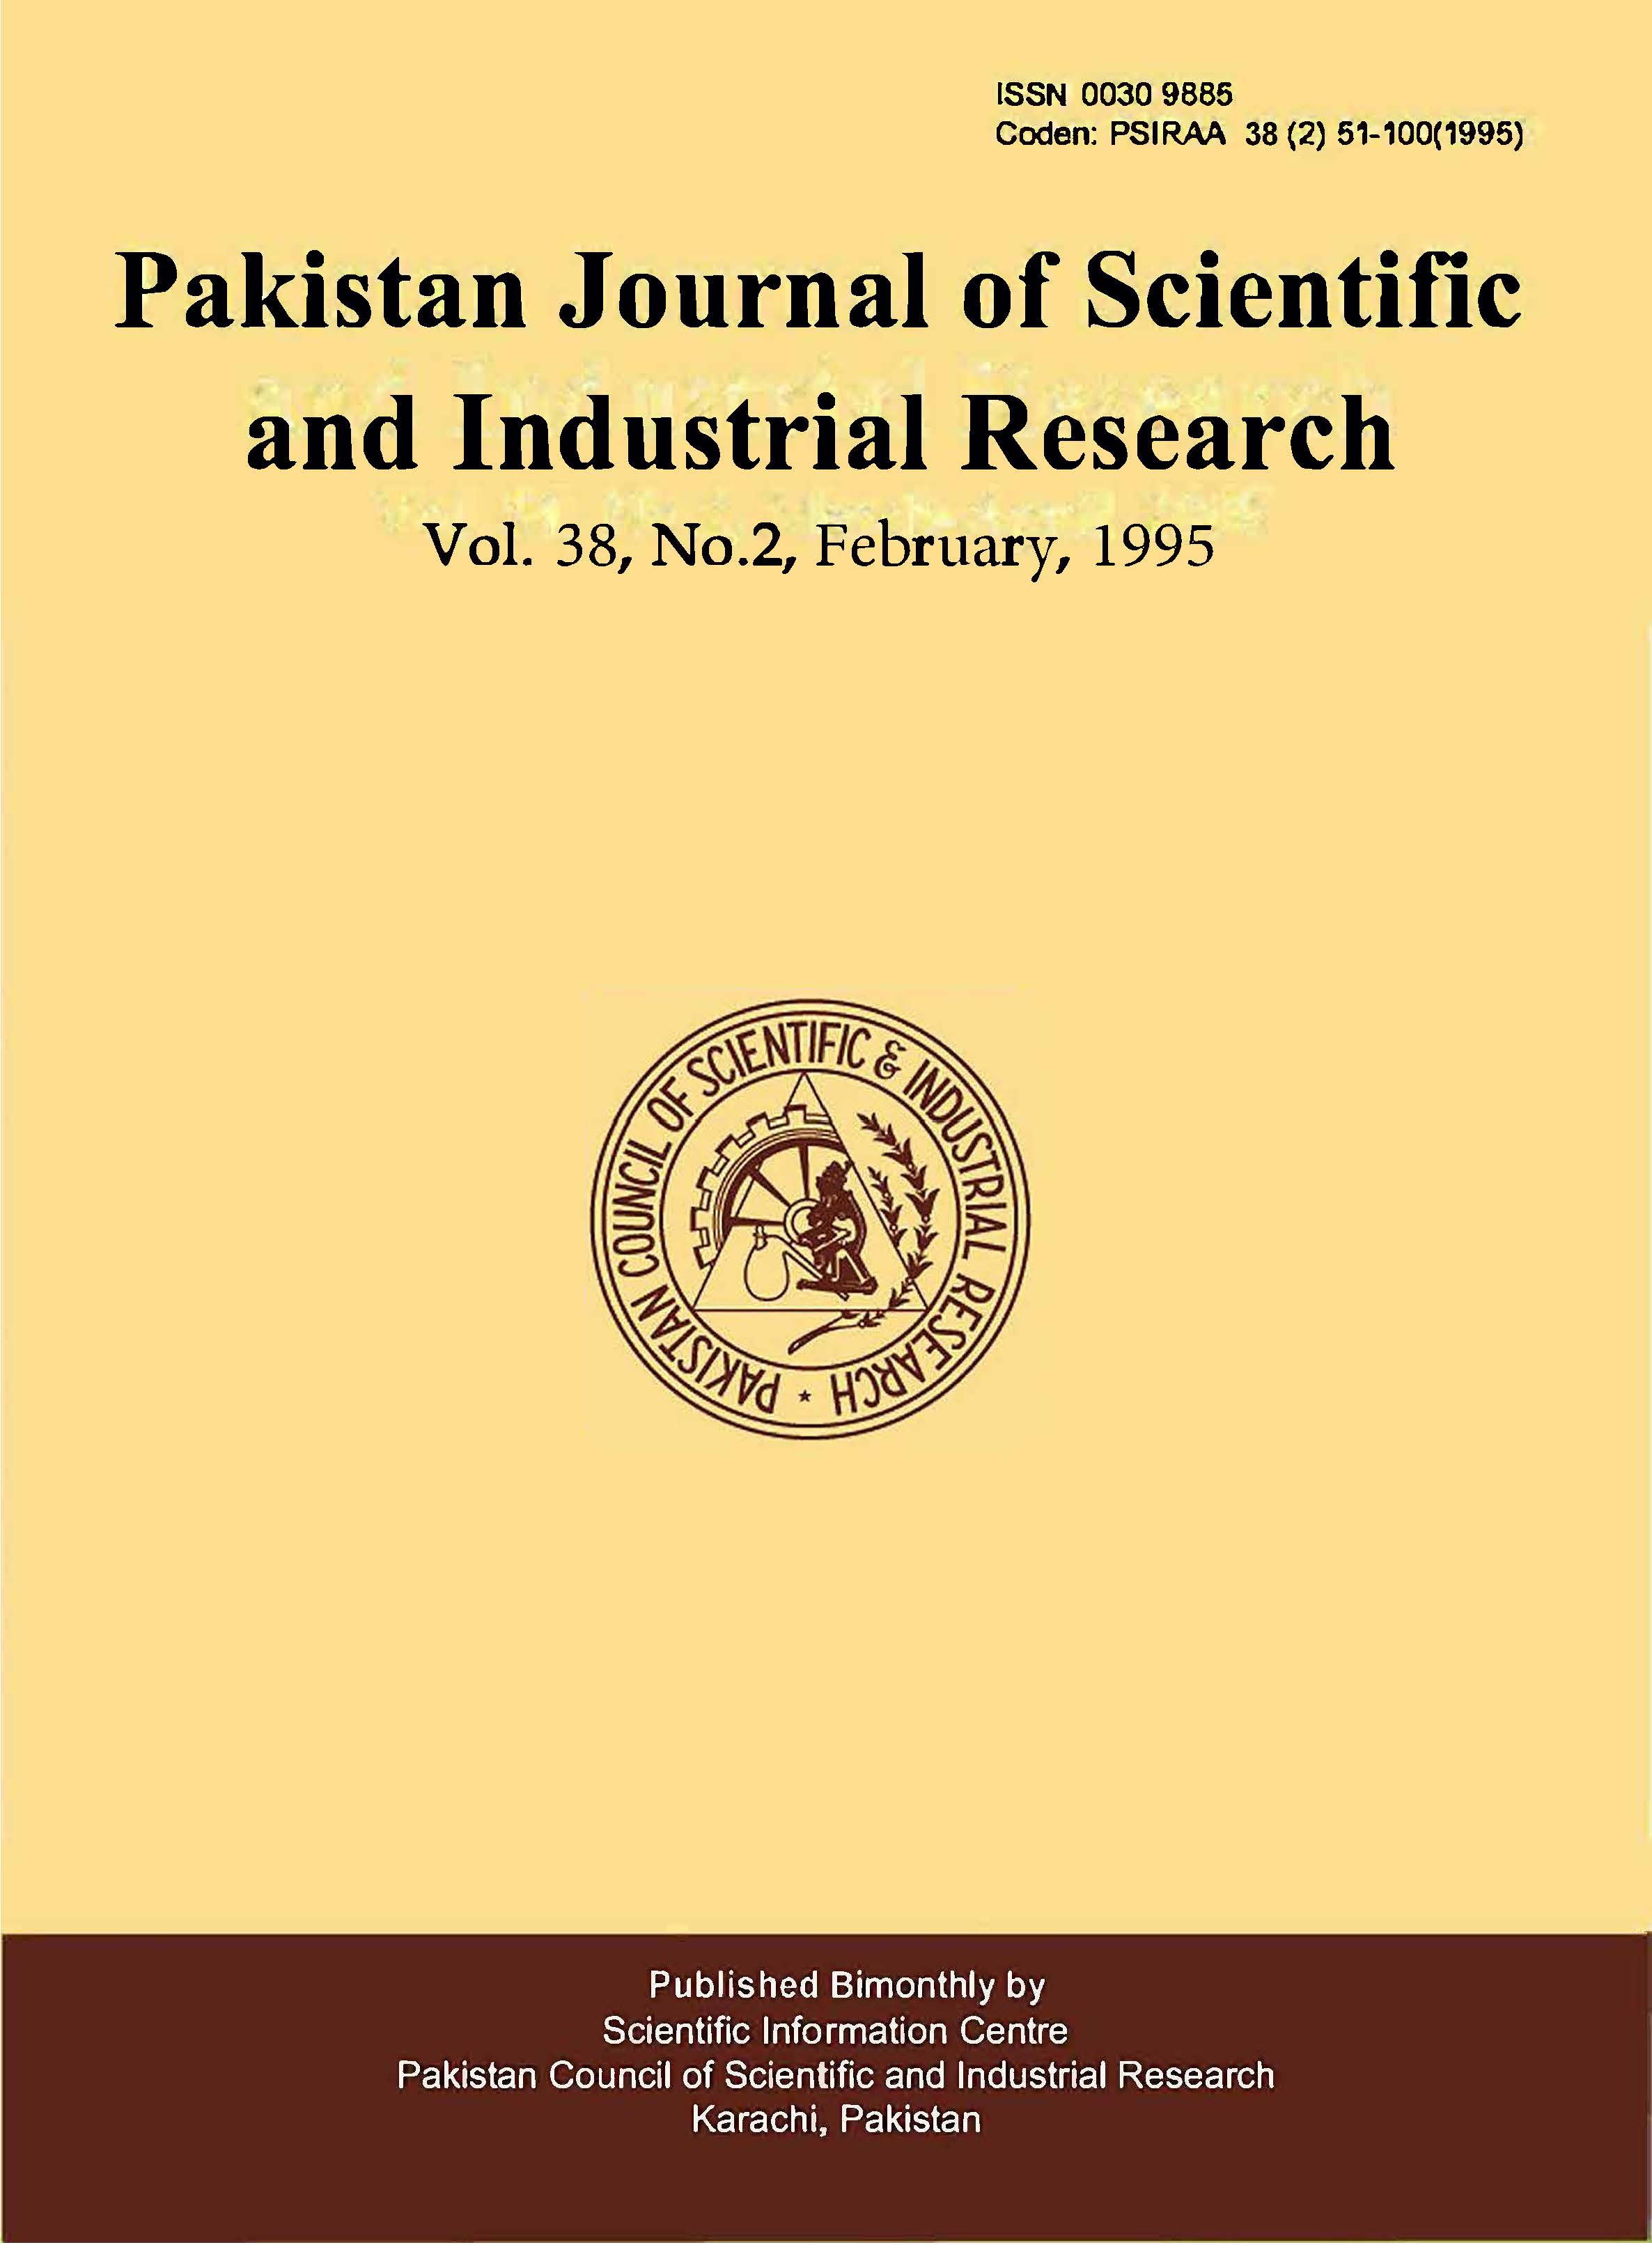 					View Vol. 38 No. 2 (1995): Pakistan Journal of Scientific and Industrial Research
				